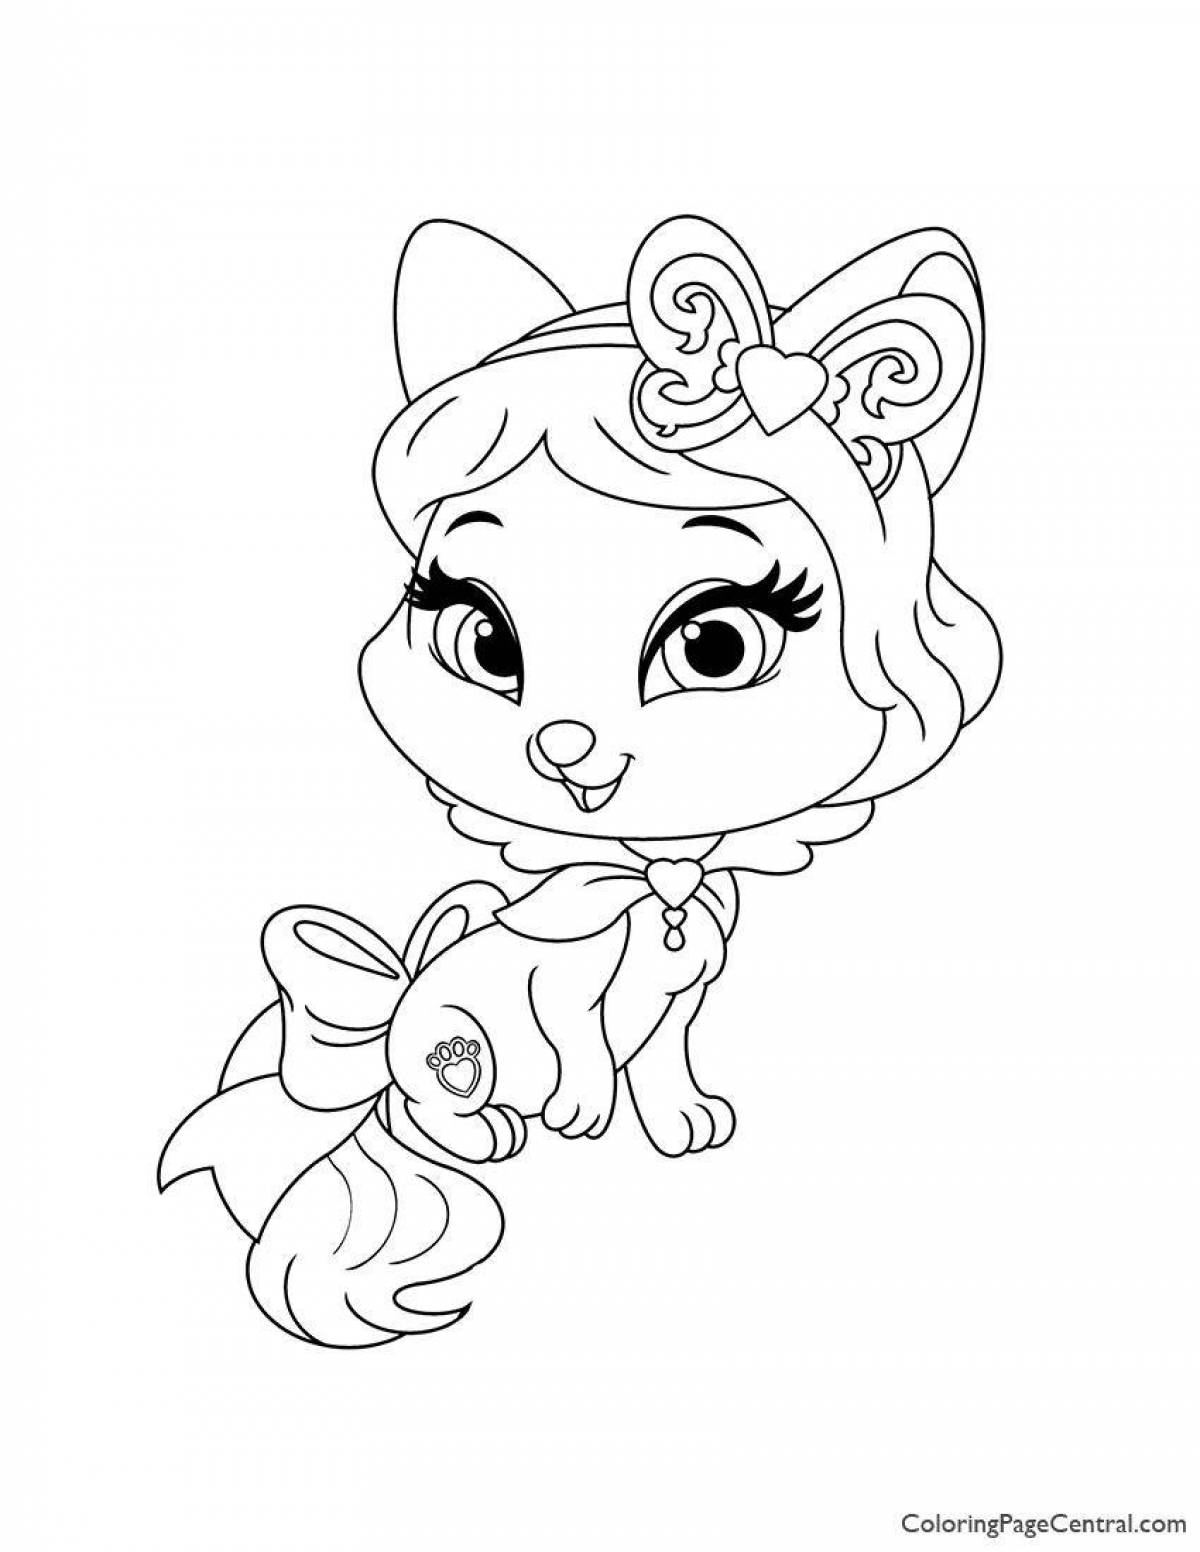 Nice pet coloring pages